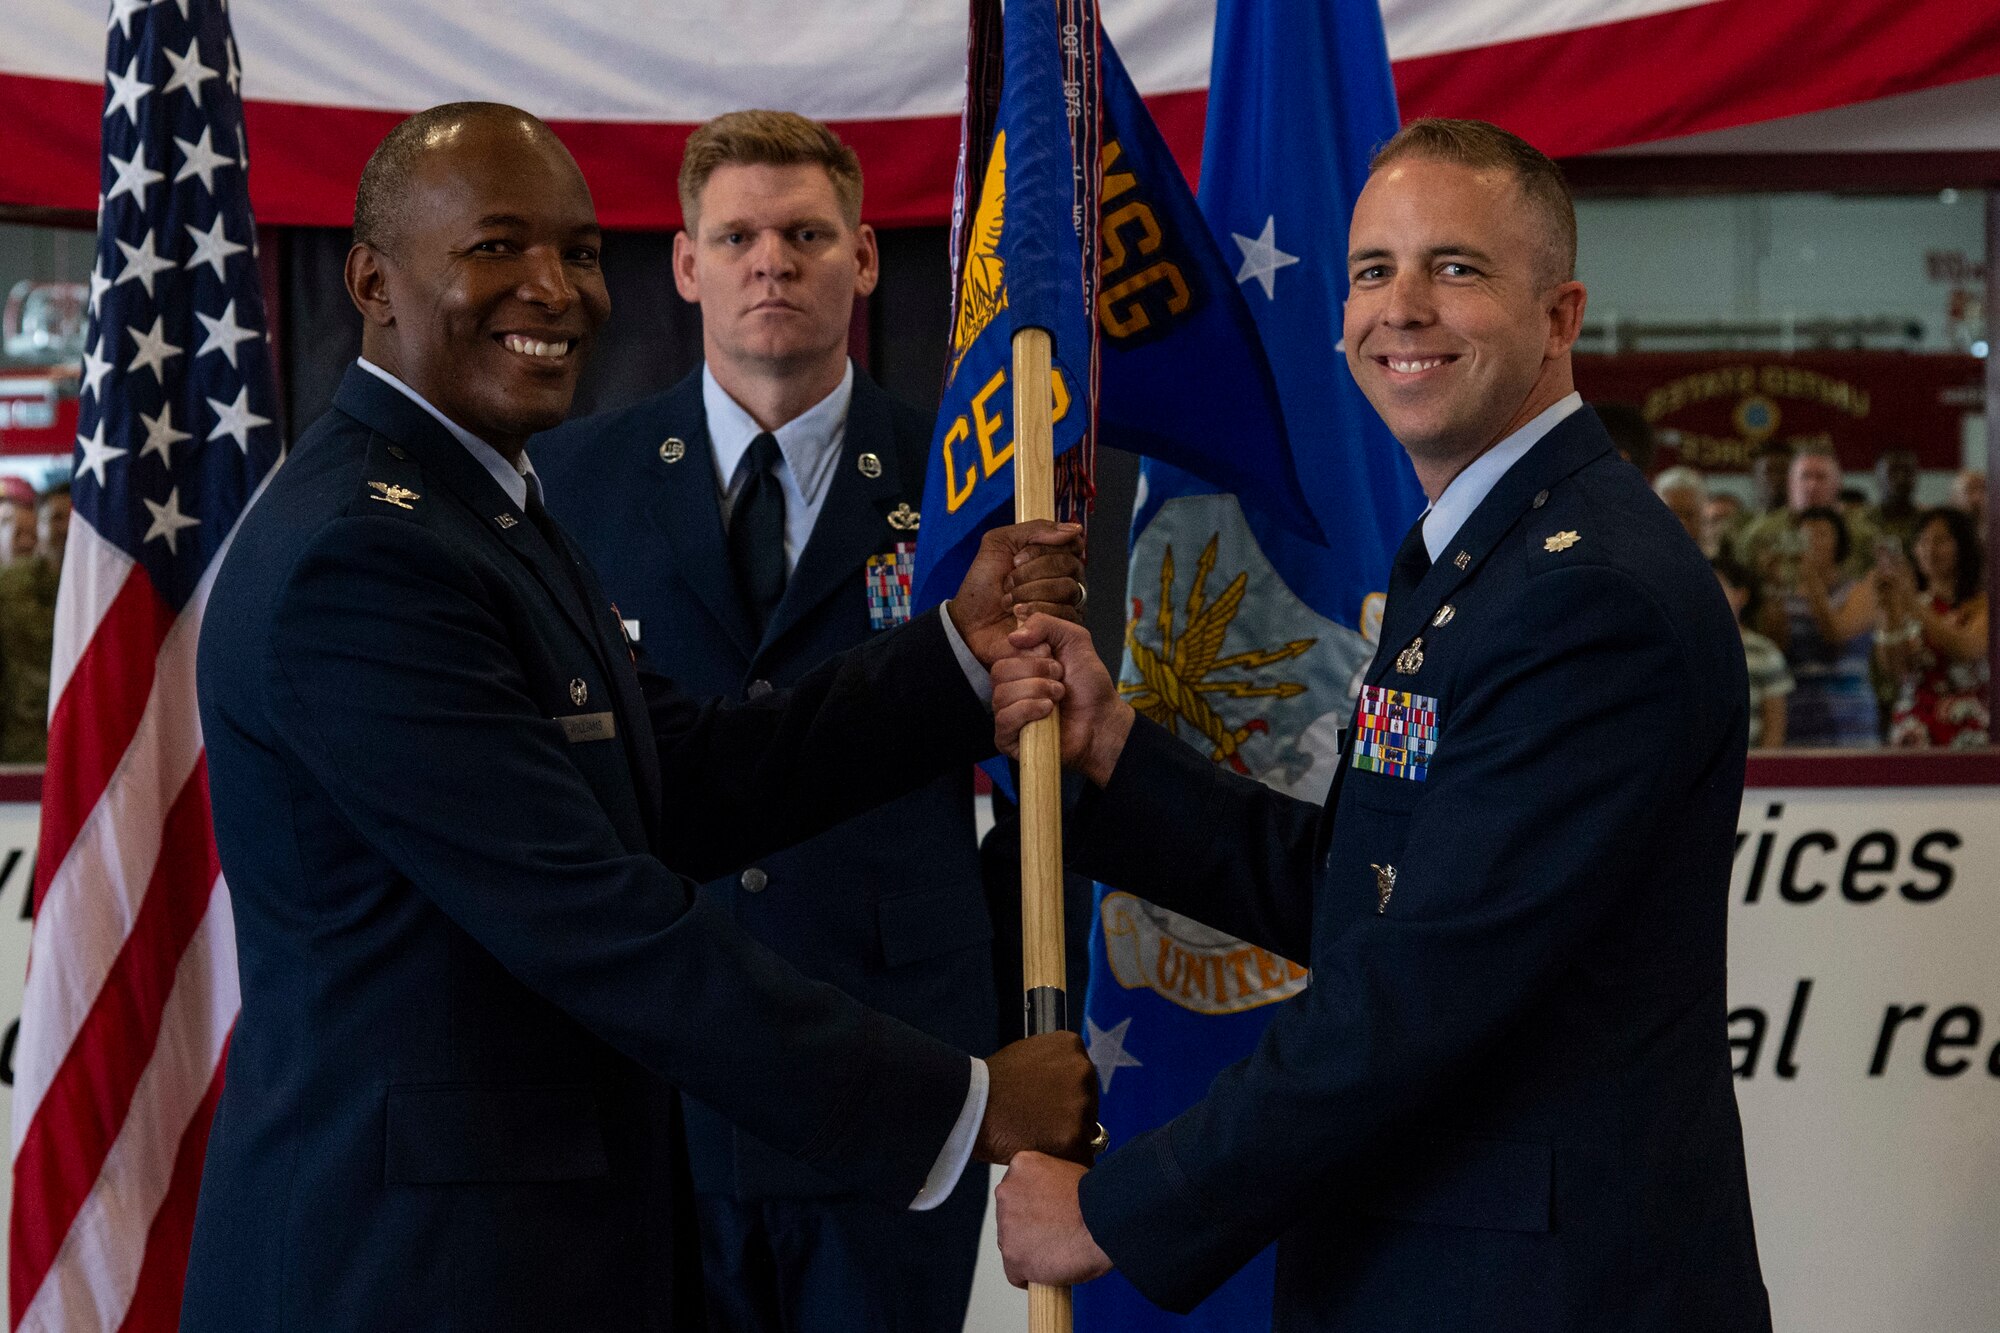 Lt. Col. Joshua Yerk, 436th Civil Engineer Squadron commander, addresses attendees after assuming command of the 436th CES during a change of command ceremony held at the base fire station on Dover Air Force Base, Delaware, June 23, 2022.